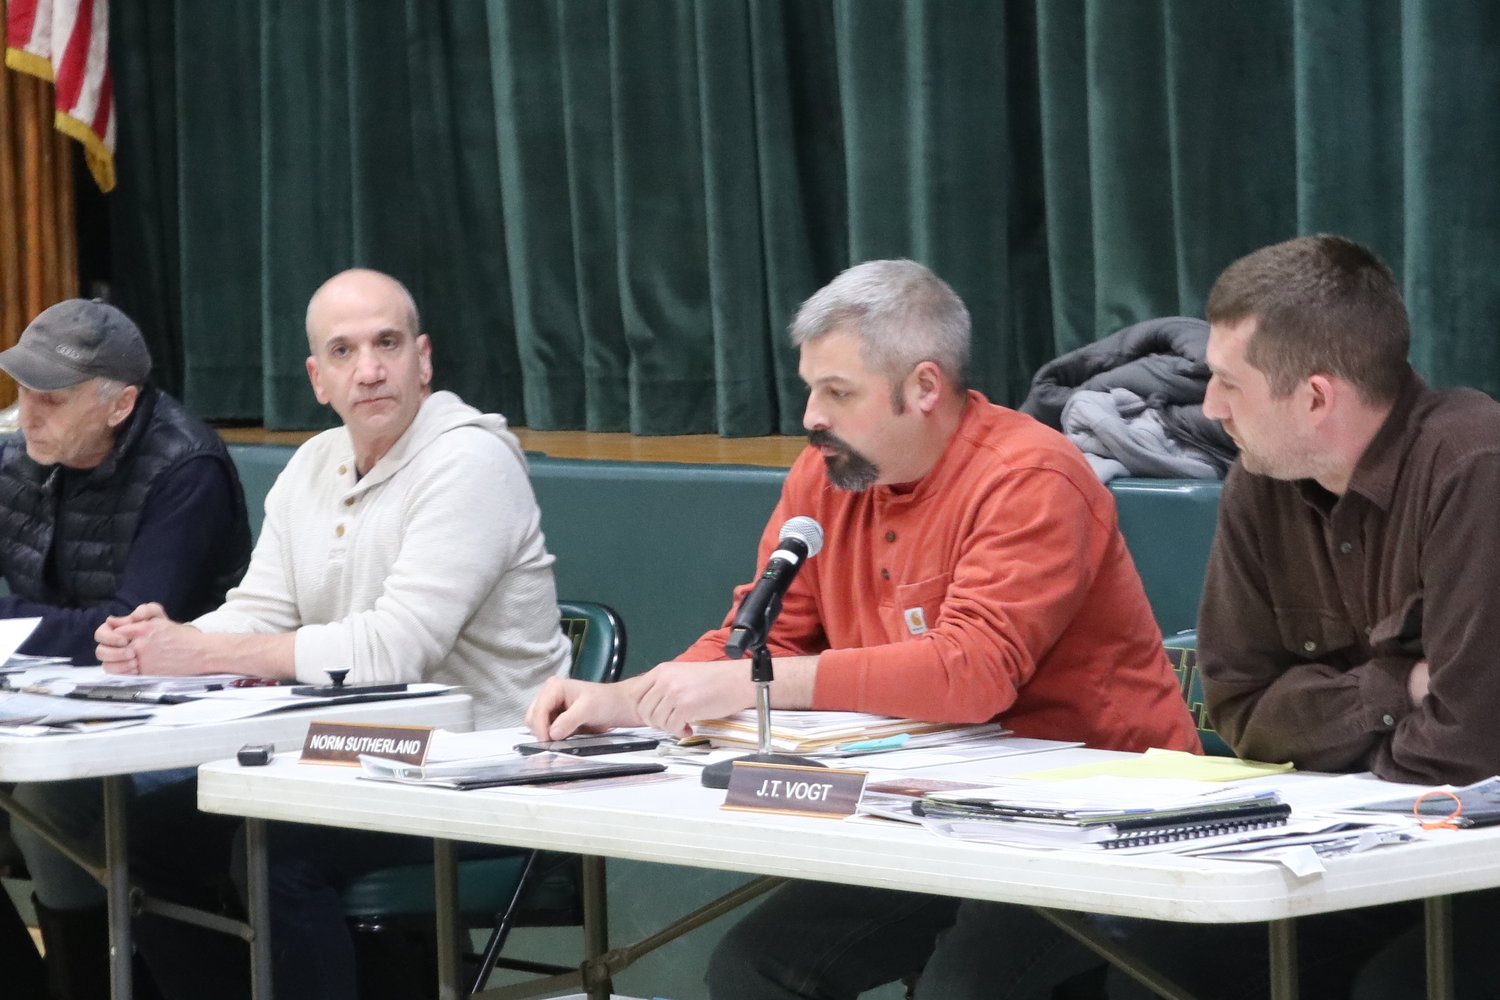 Planning board chairman Norm Sutherland, center, is flanked by member Jeff Spitz and vice chairman Jon Vogt at the meeting on Januar7 26 at the Eldred High School gymnasium.